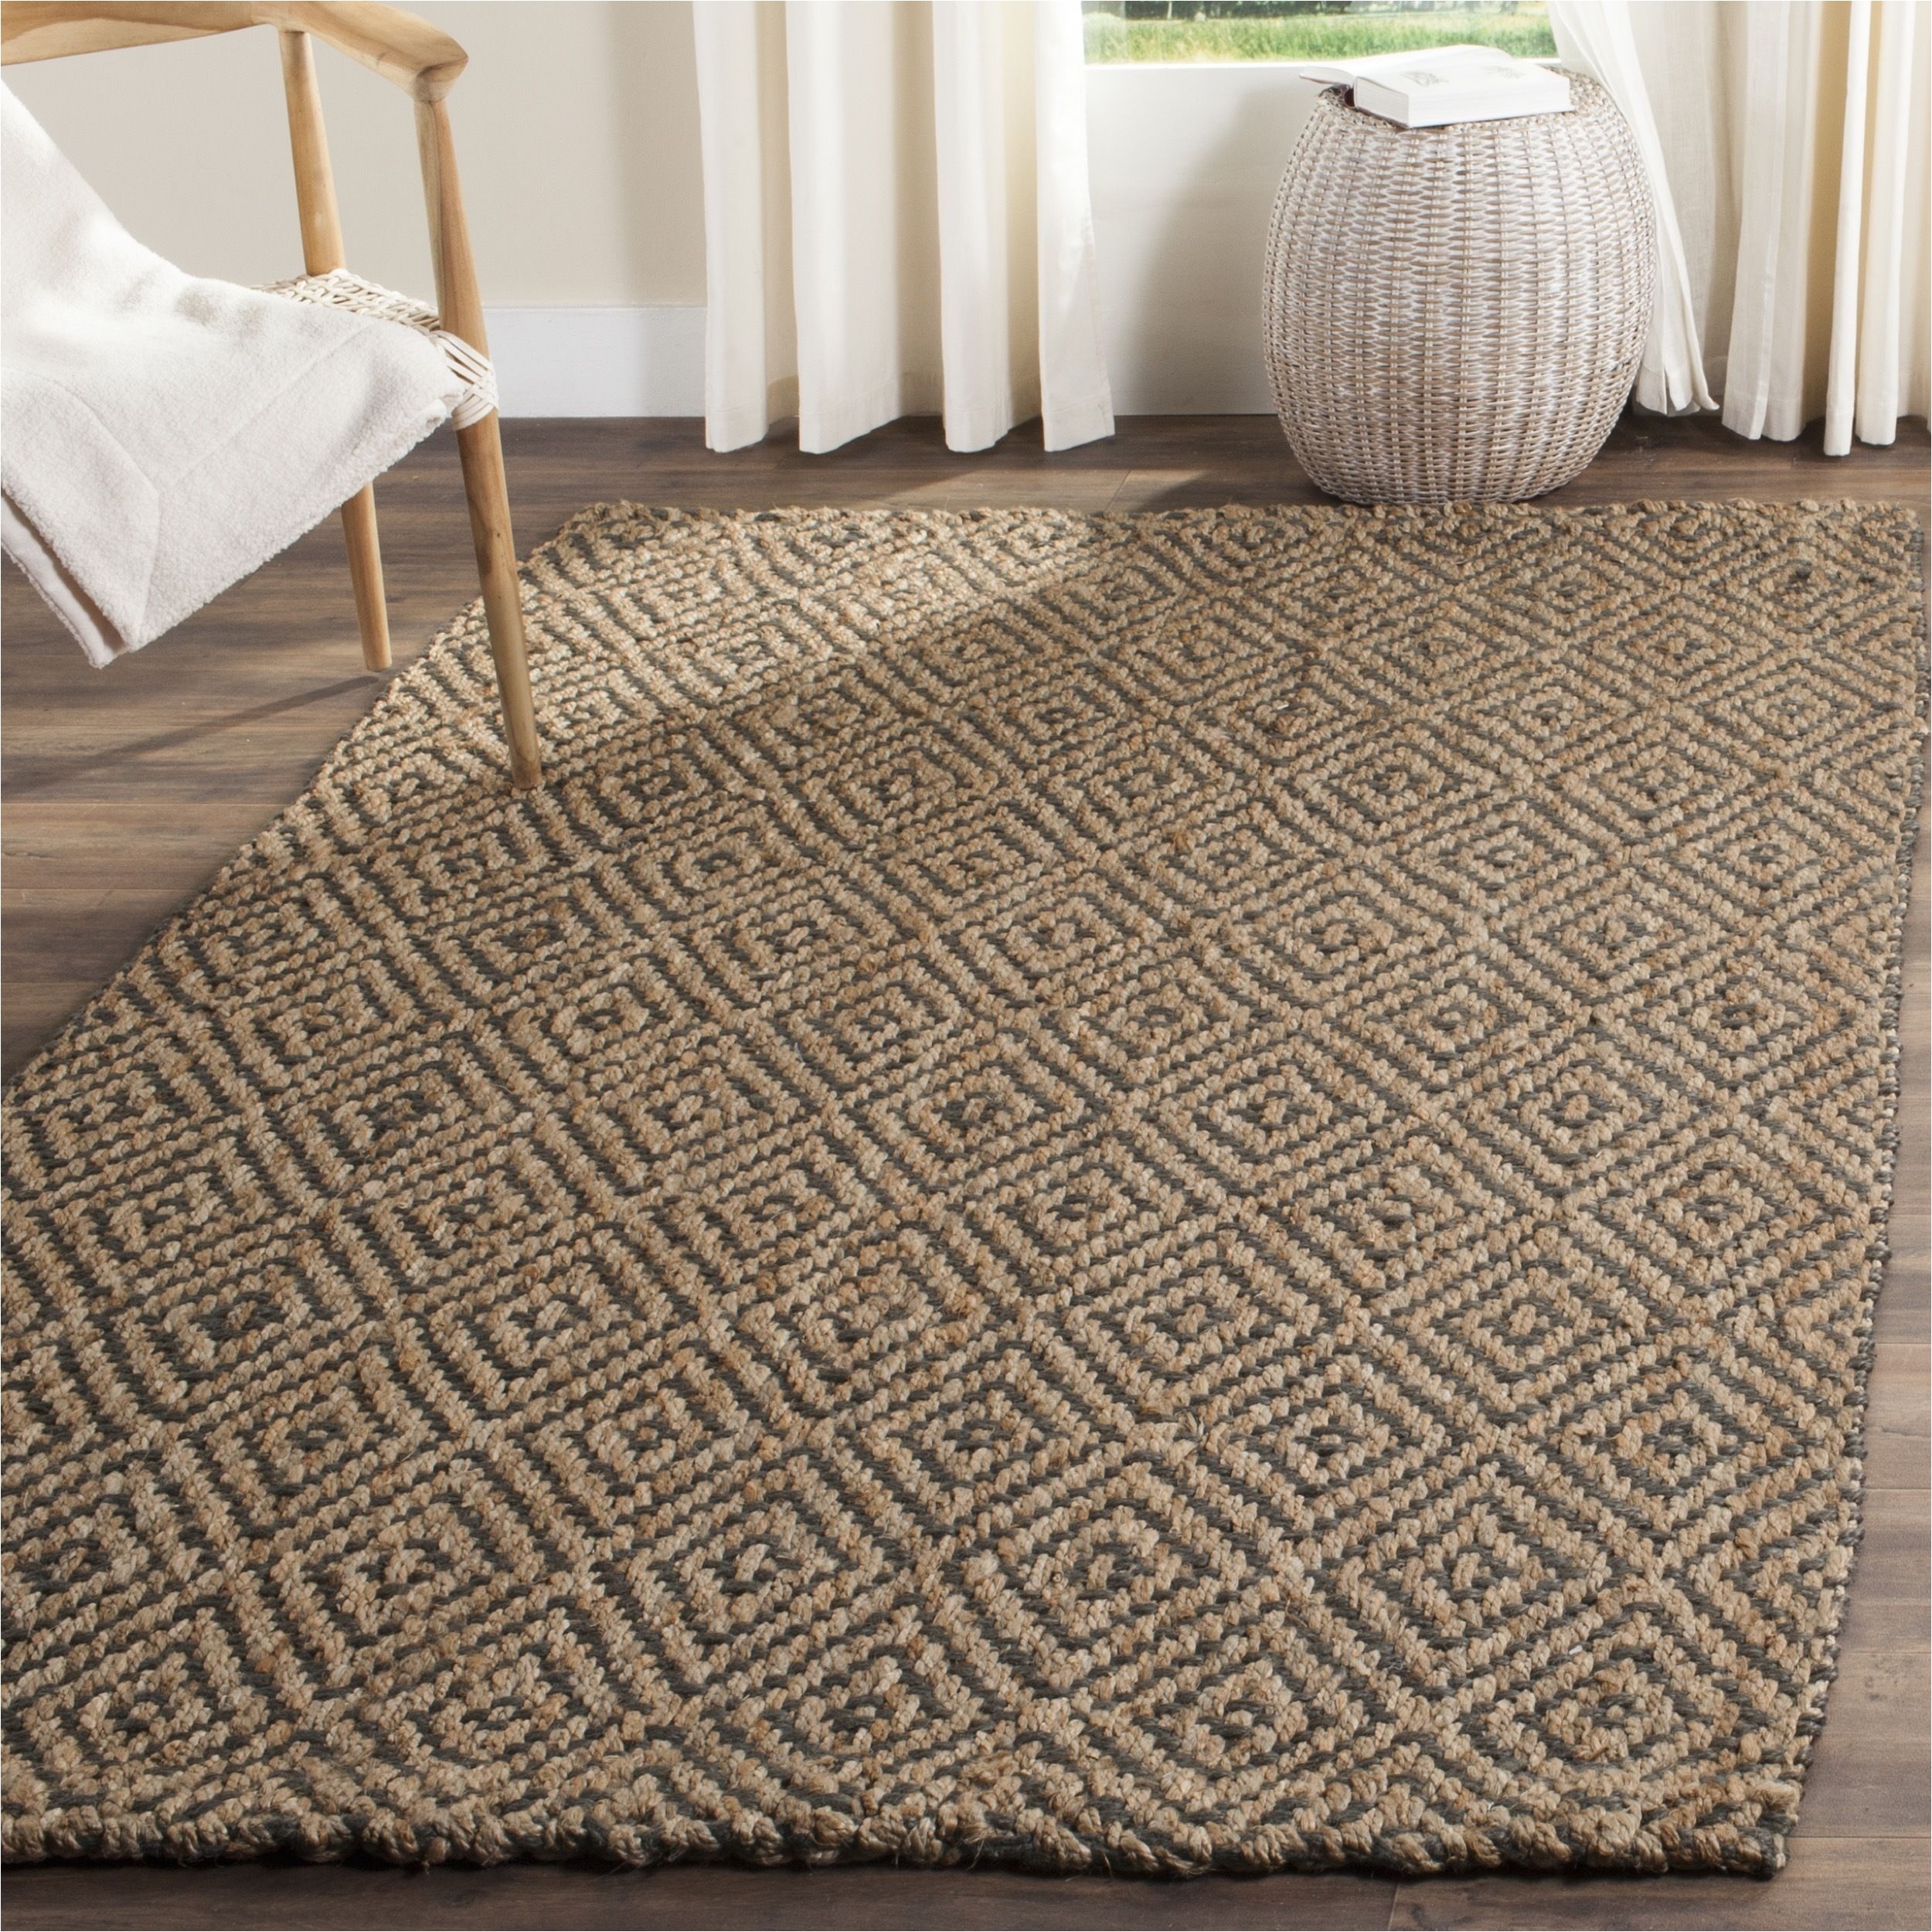 beige brown camel khaki natural 5 x 8 6 x 8 6 x 9 5x8 6x9 rugs enhance your home s comfort level and protect your flooring with versatile 5x8 and